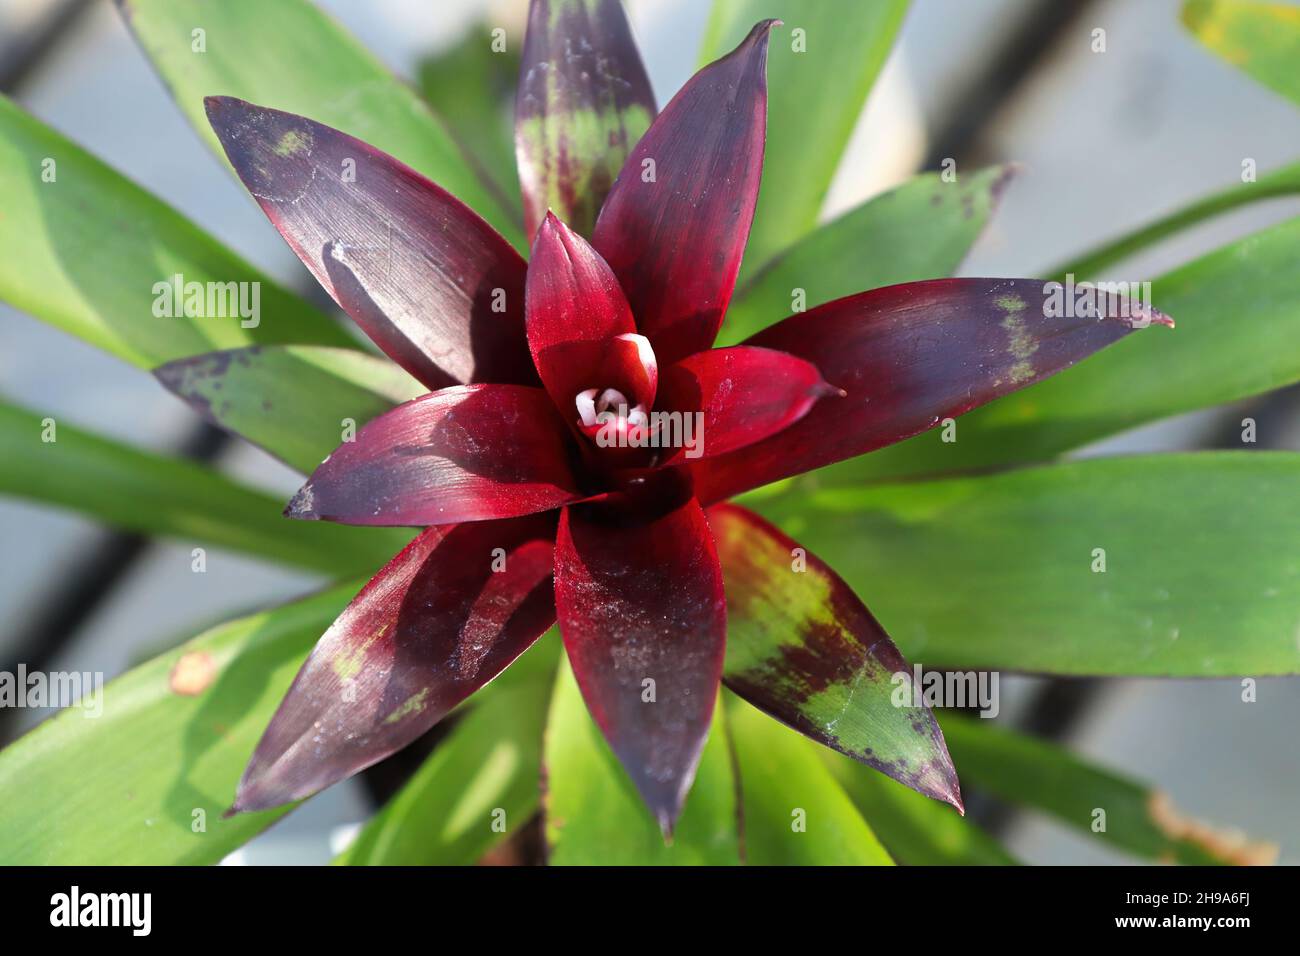 Closeup top view of red bromeliad leaf stalks Stock Photo